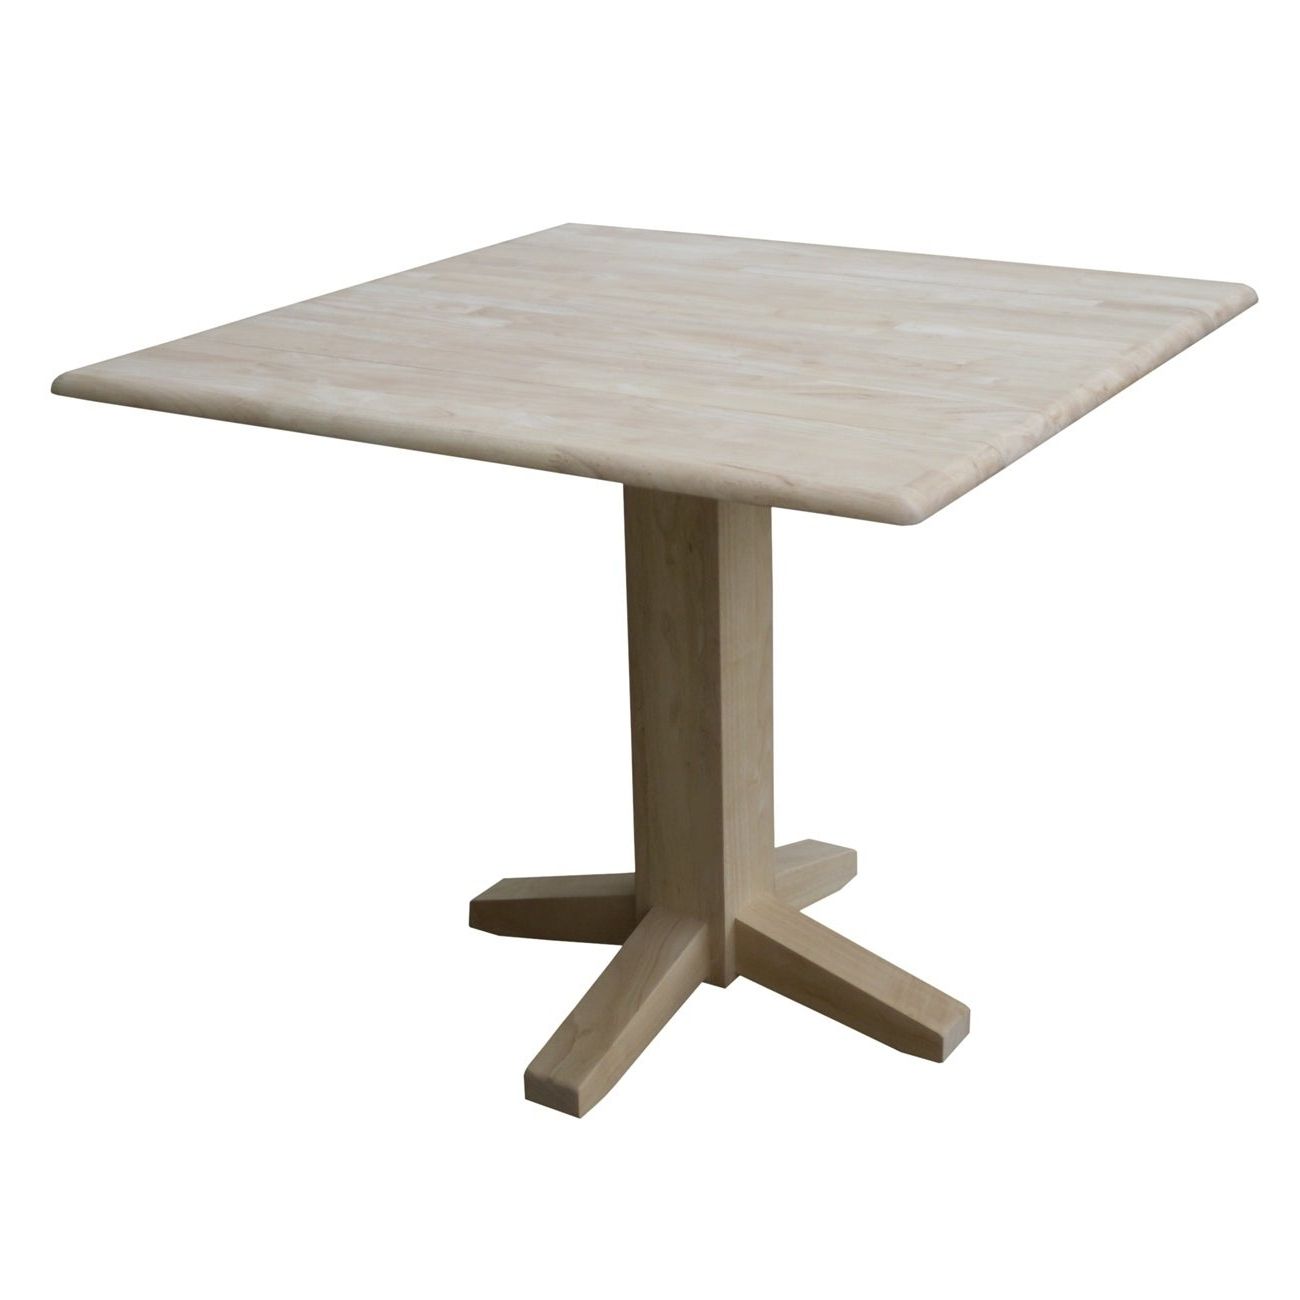 International Concepts Pedestal Dual Drop Leaf Dining Table – Unfinished With Most Current Unfinished Drop Leaf Casual Dining Tables (View 17 of 25)